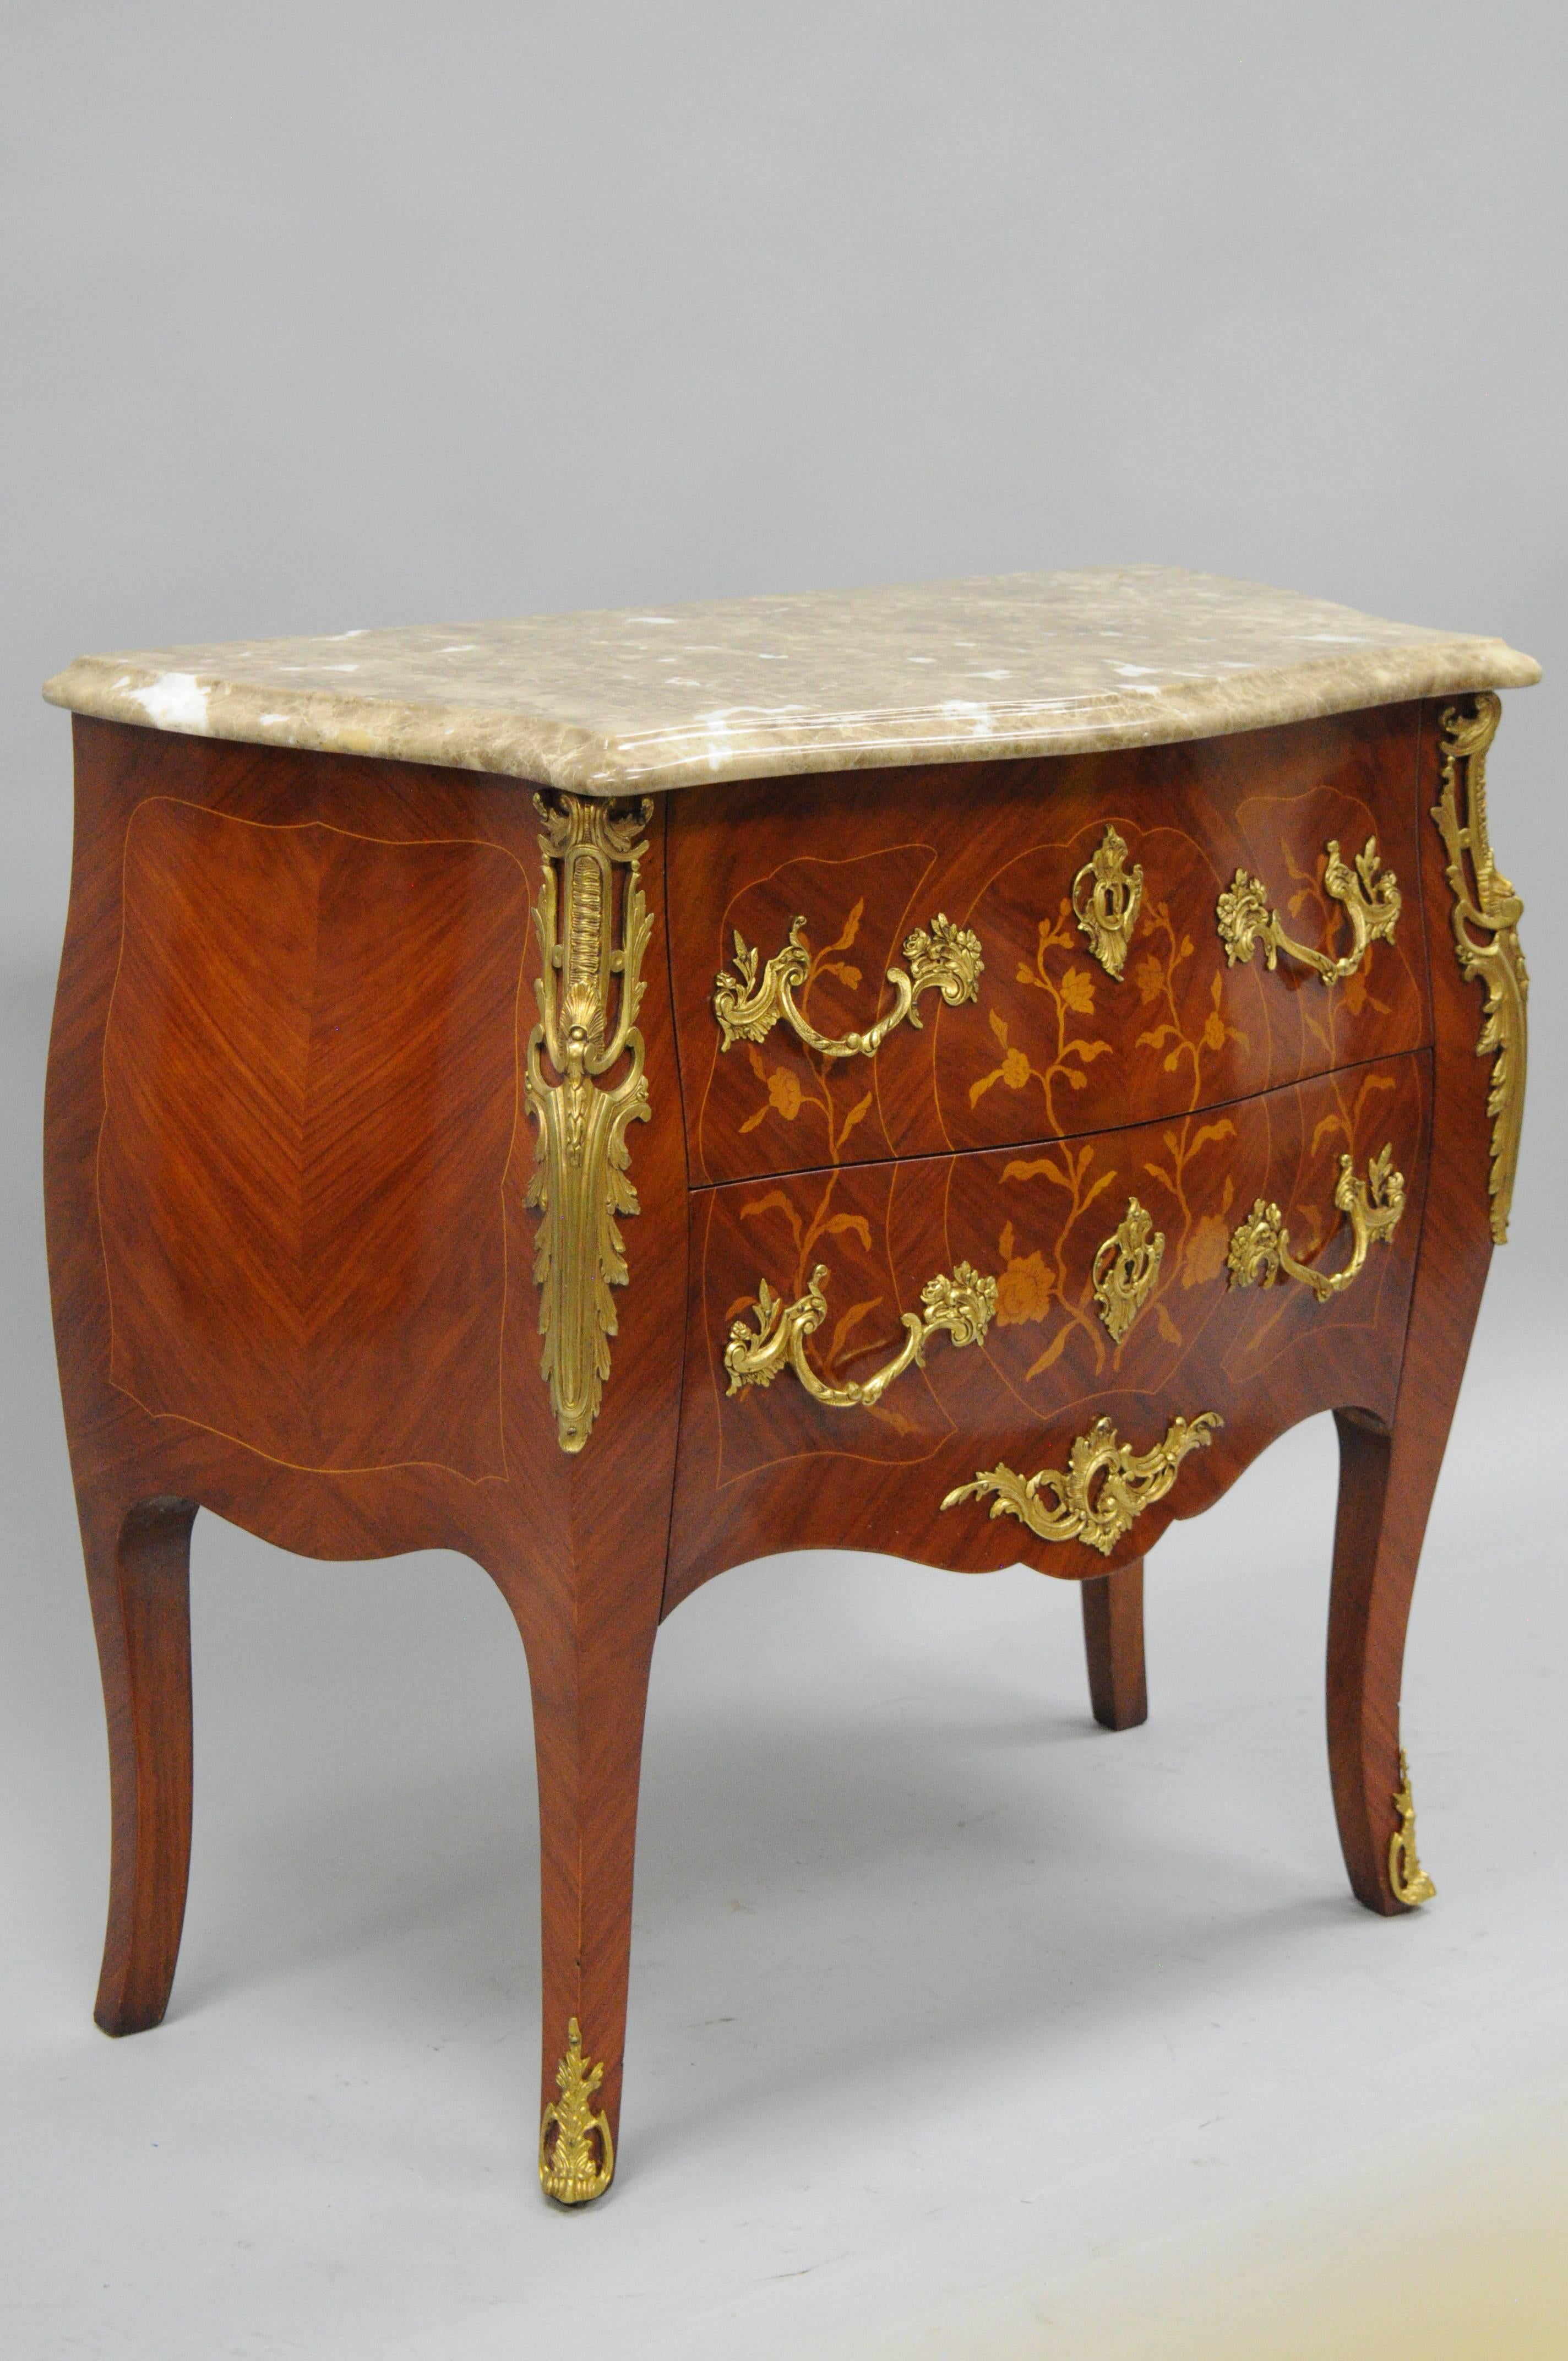 20th century French Louis XV style marble-top bombe form chest / dresser with finely cast bronze ormolu. Item features a shaped tan marble-top with beveled edge, finely cast bronze French Rococo style acanthus ormolu mounts, two drawers (dovetailed